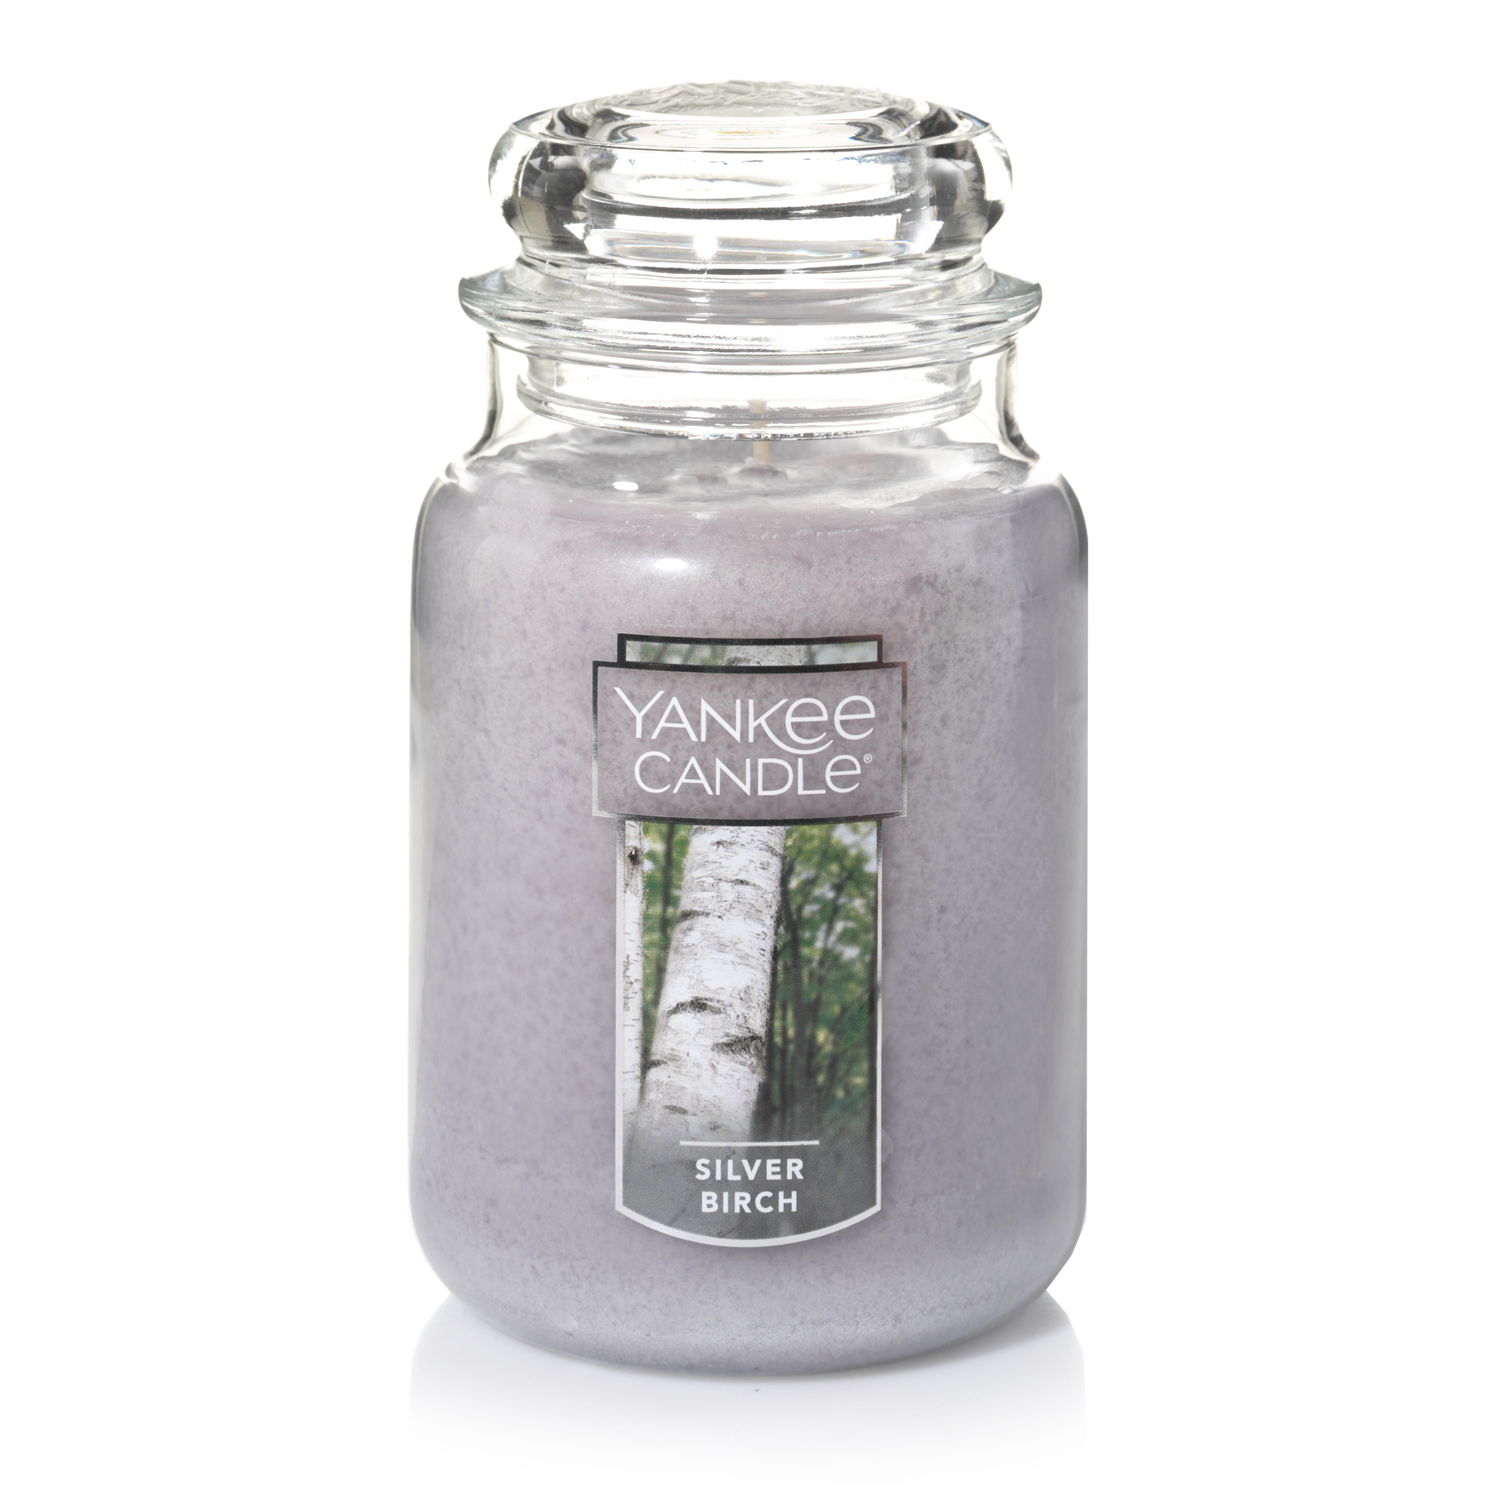 Yankee Candle Silver Birch - Original Large Jar Scented Candle - image 1 of 5